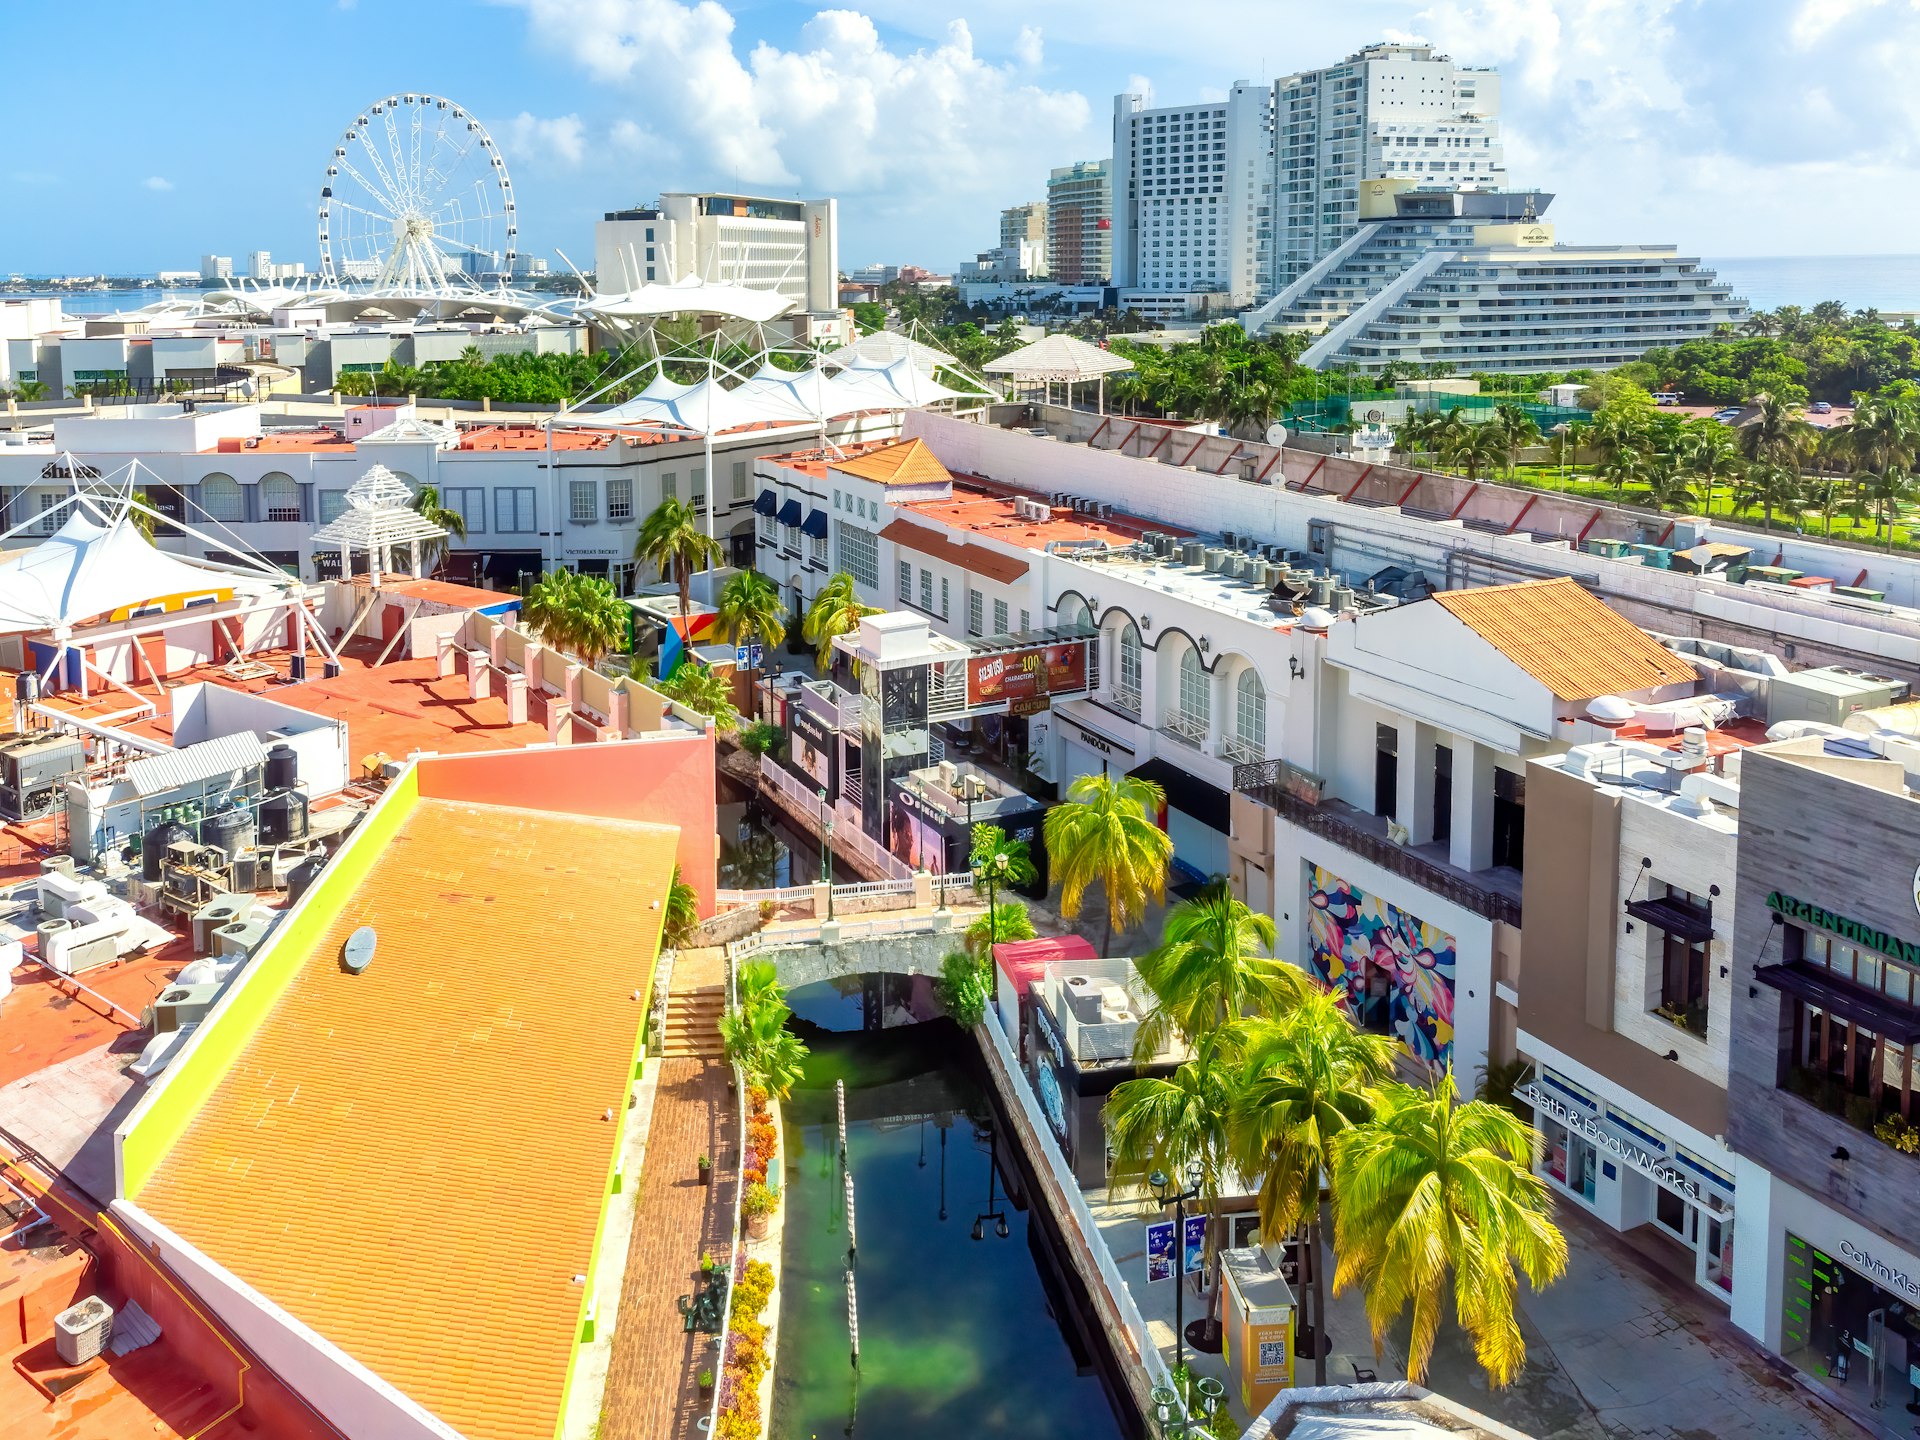 An aerial view of the colorful La Isla shopping mall in Cancún